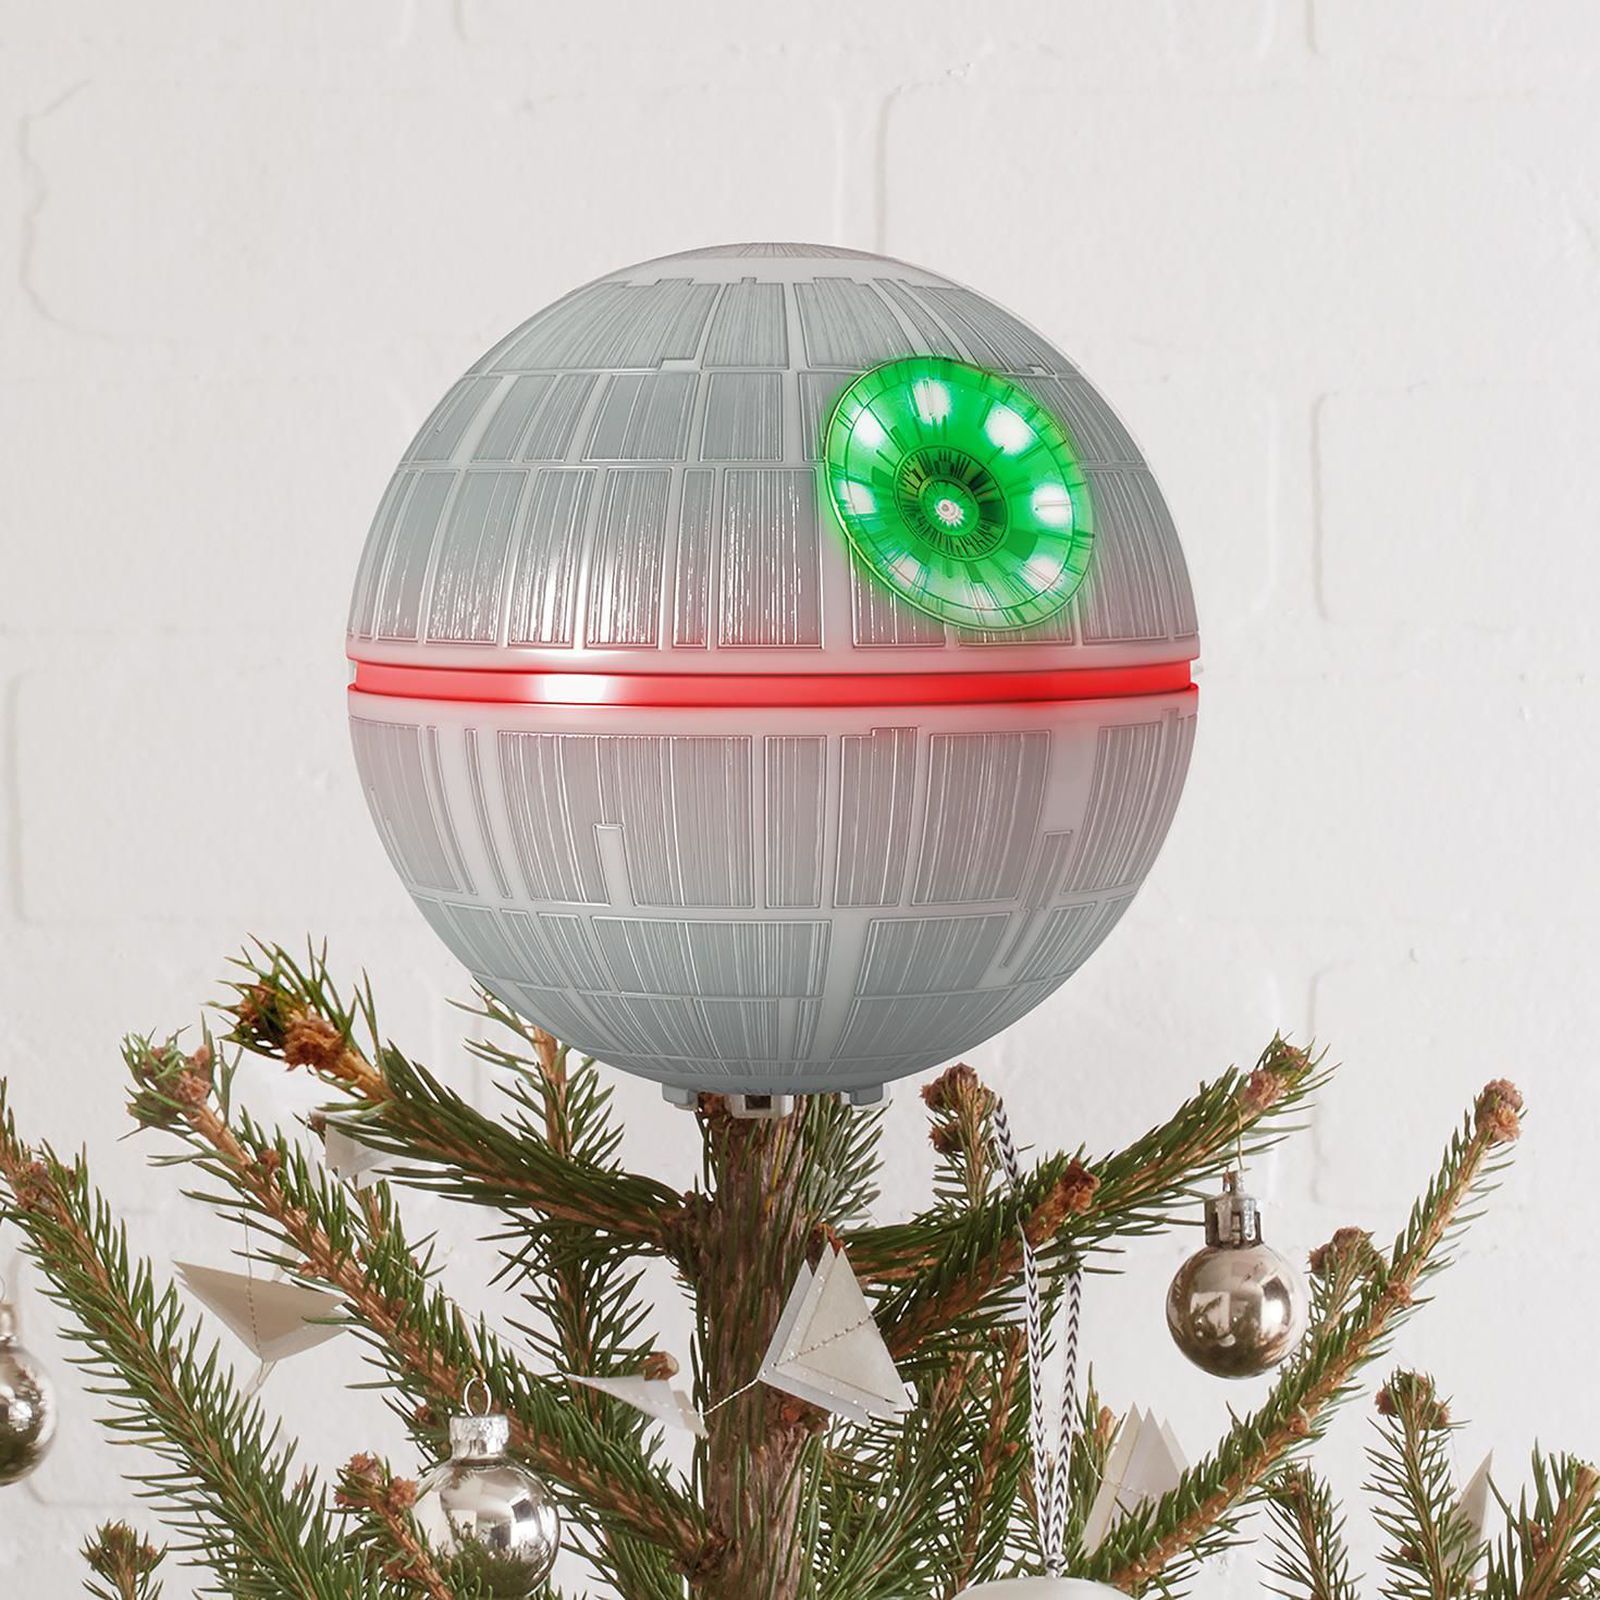 13 Best Christmas Decorations Every Geek Should Own image 13